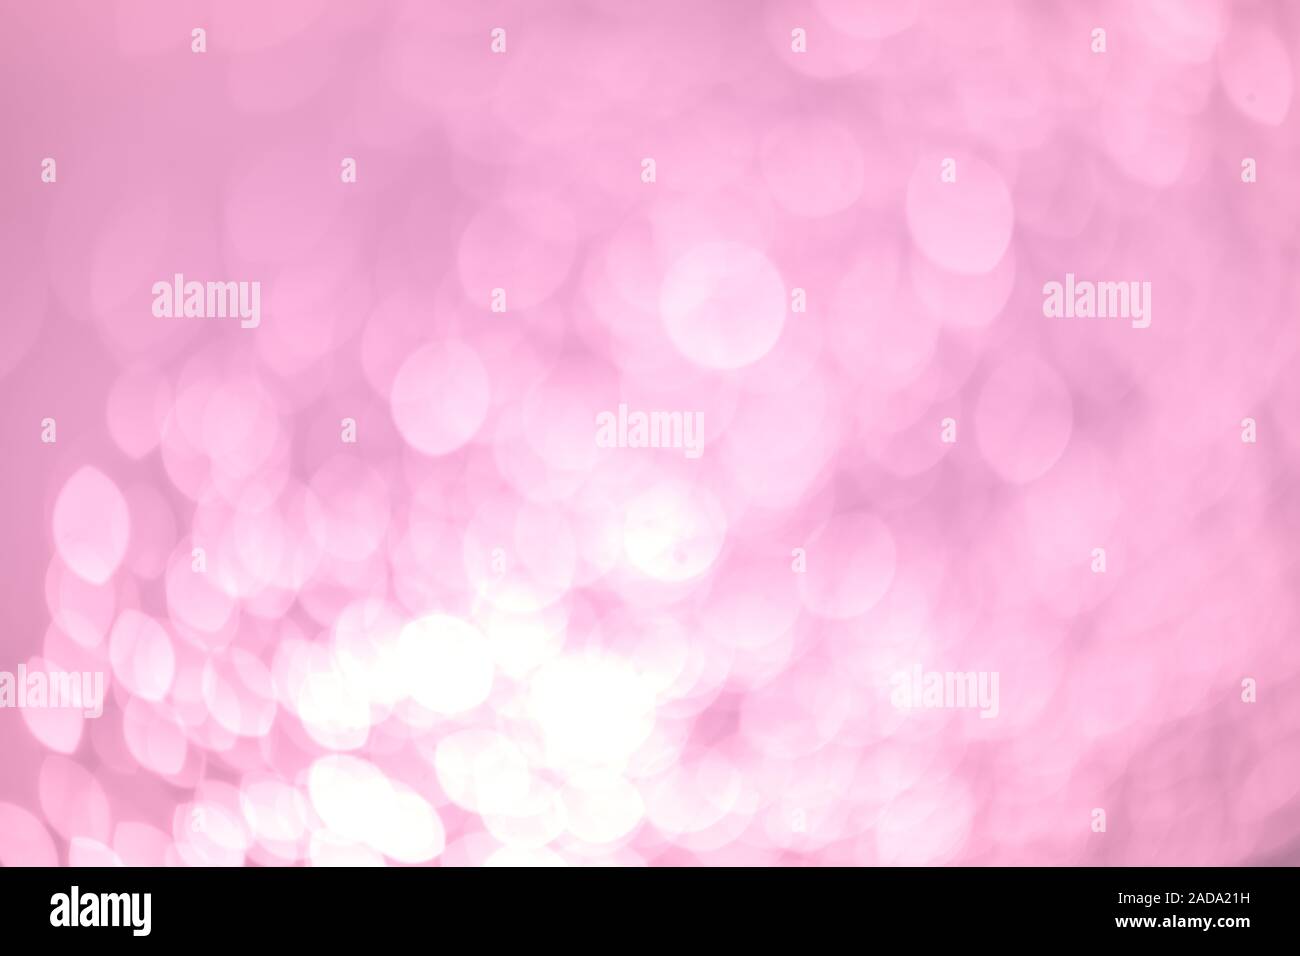 Disco ball on luxury neon pink background with sparkles. Template